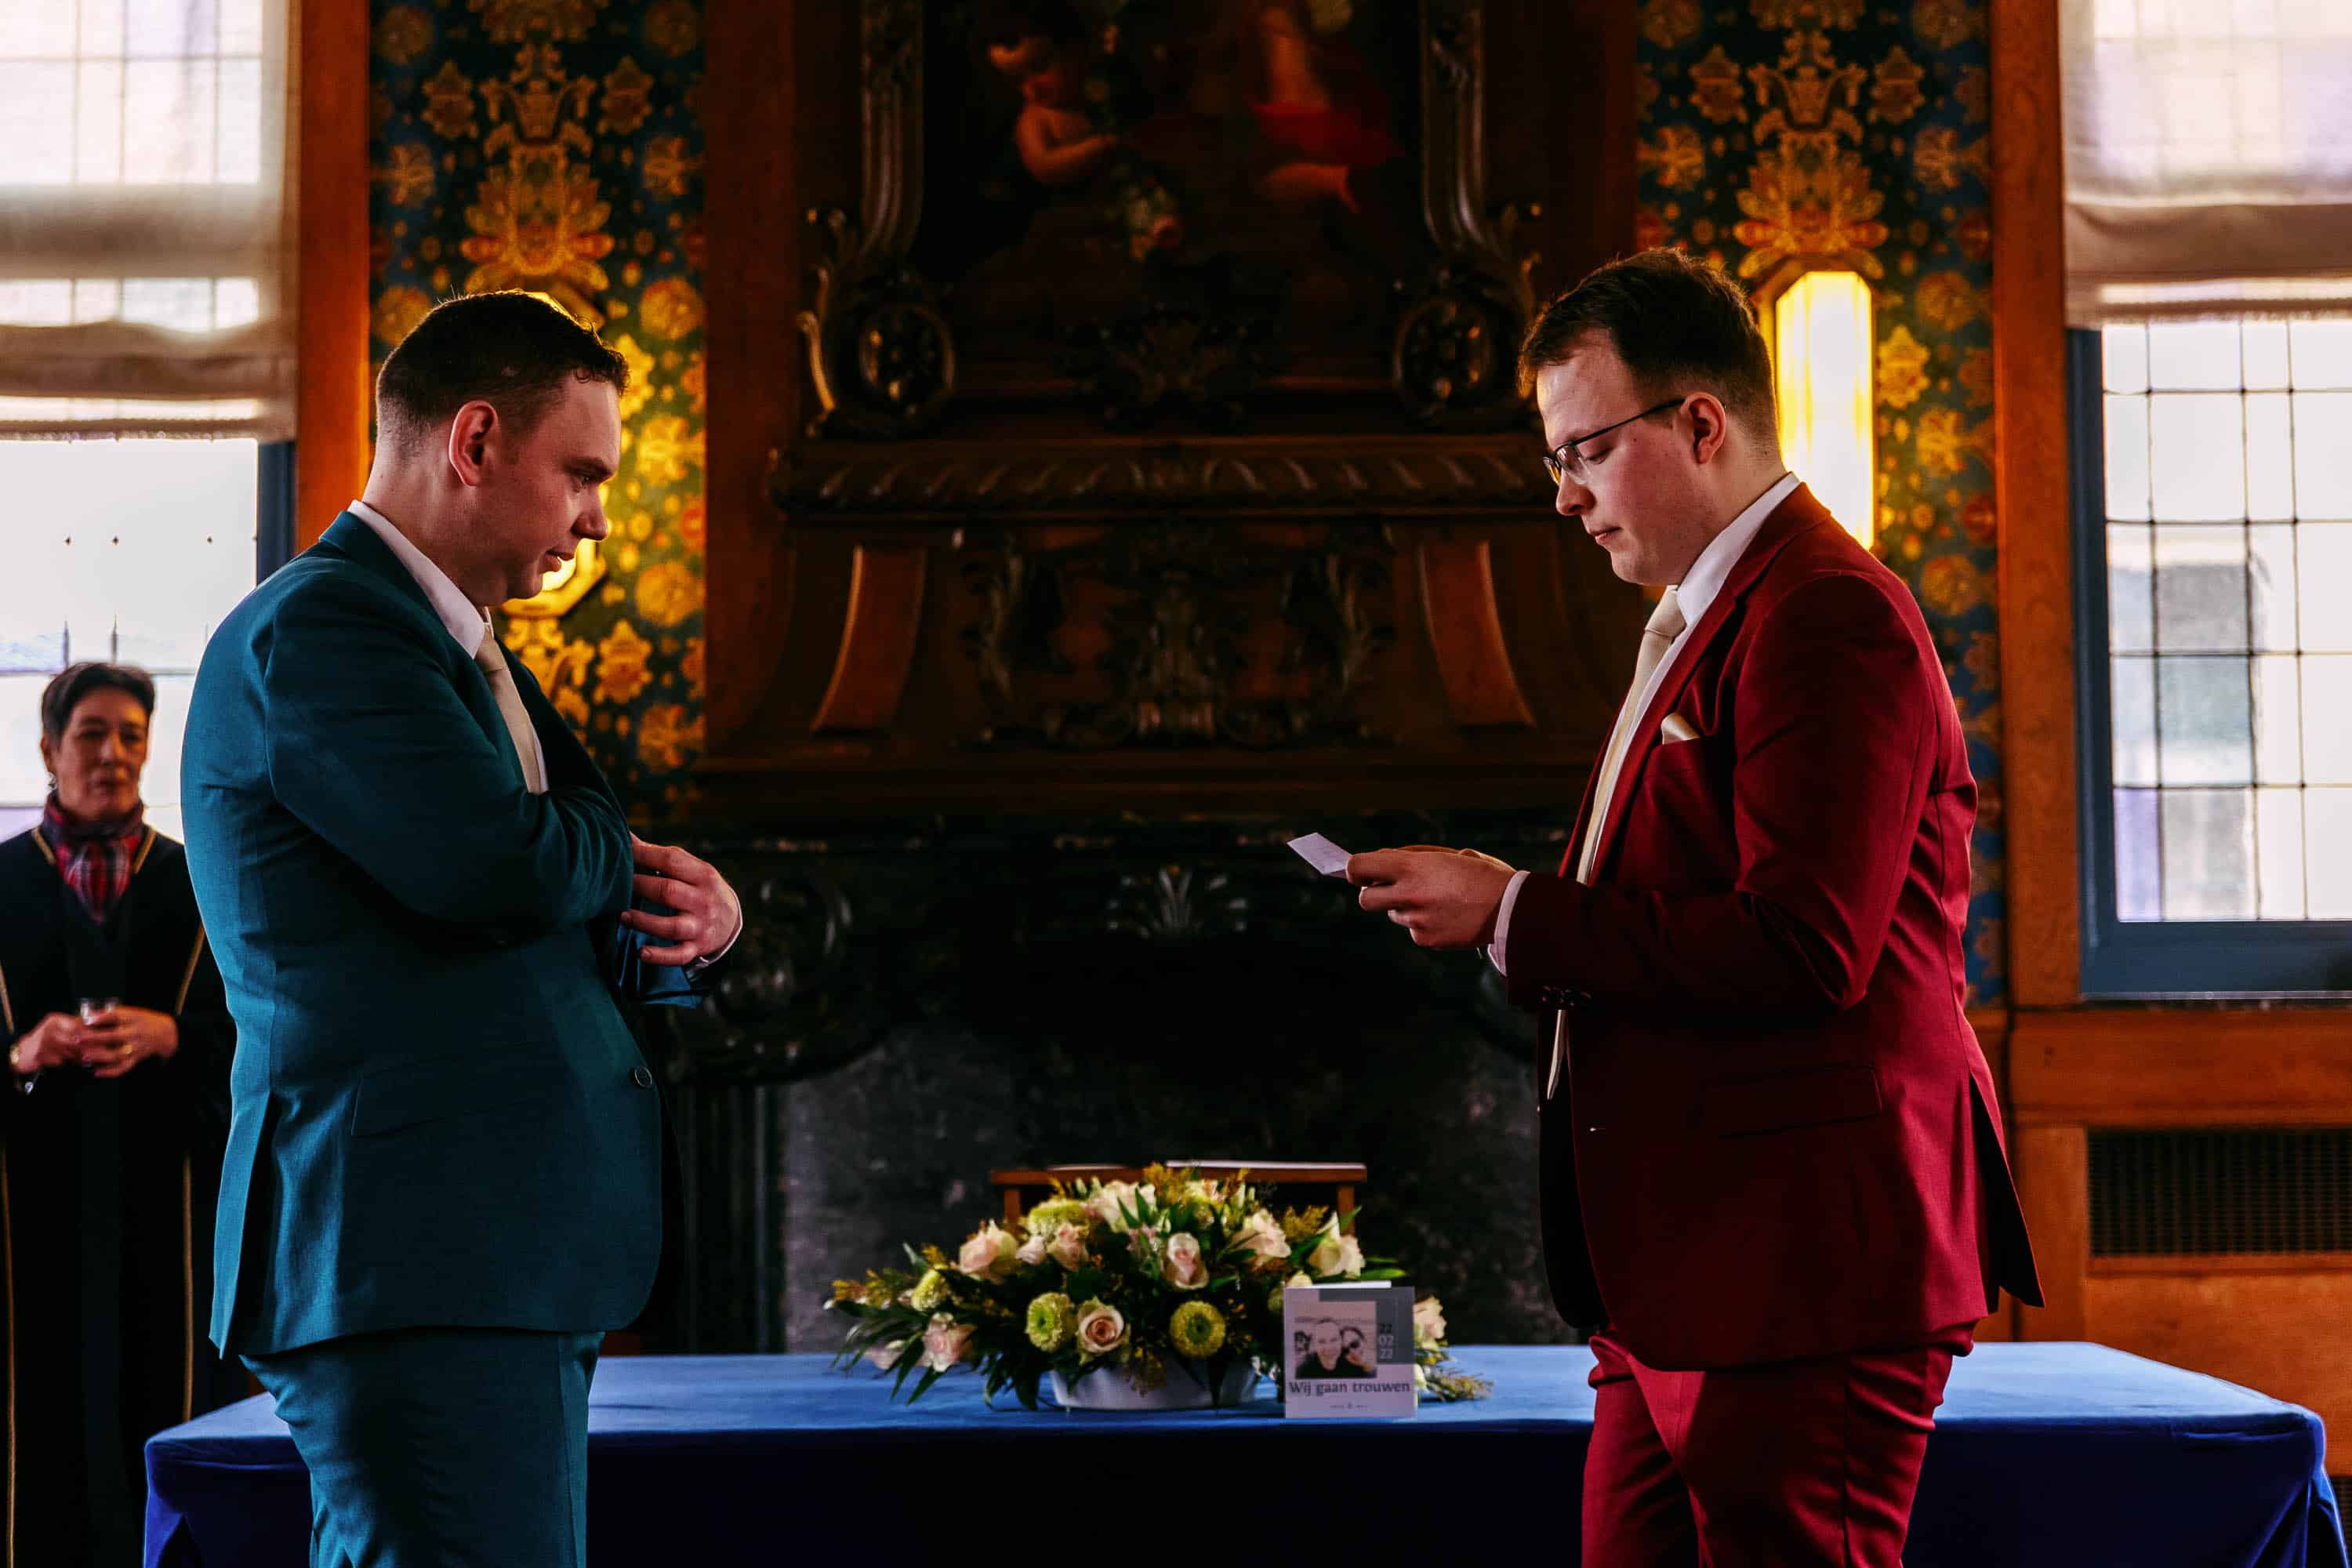 Two men in wedding-themed suits look at each other at a table.